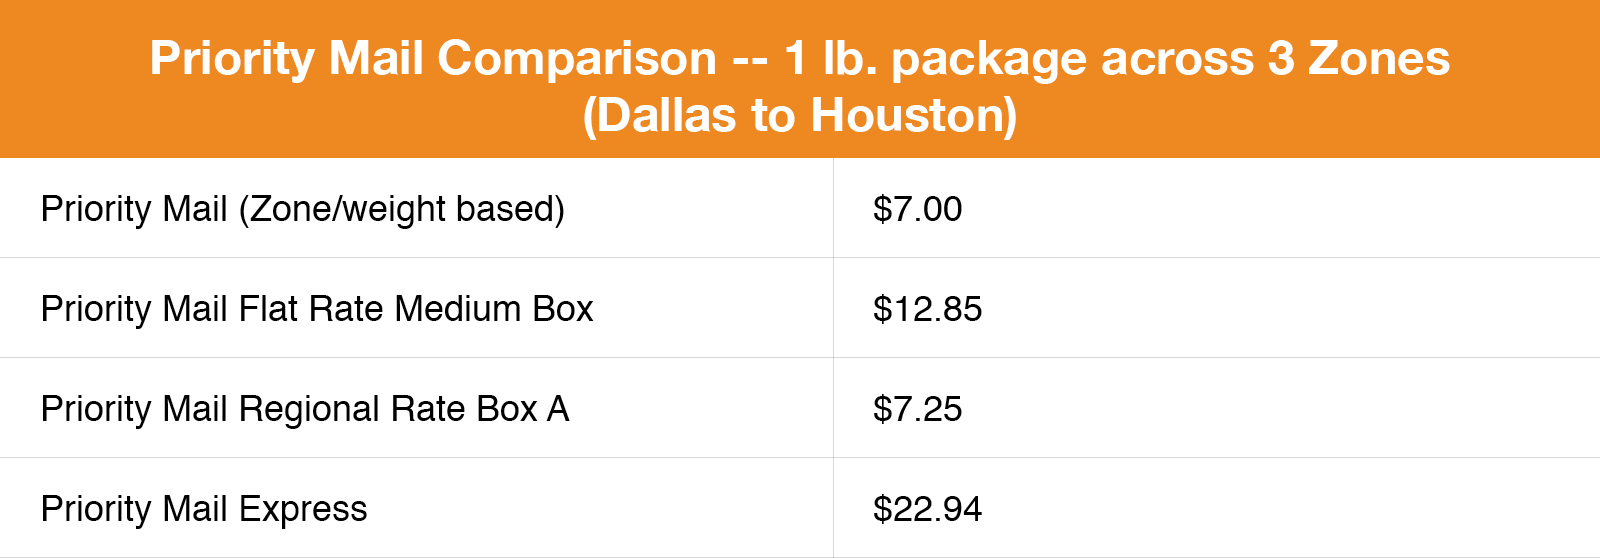 Priority Mail comparison chart for 1 lb package travelling 3 zones